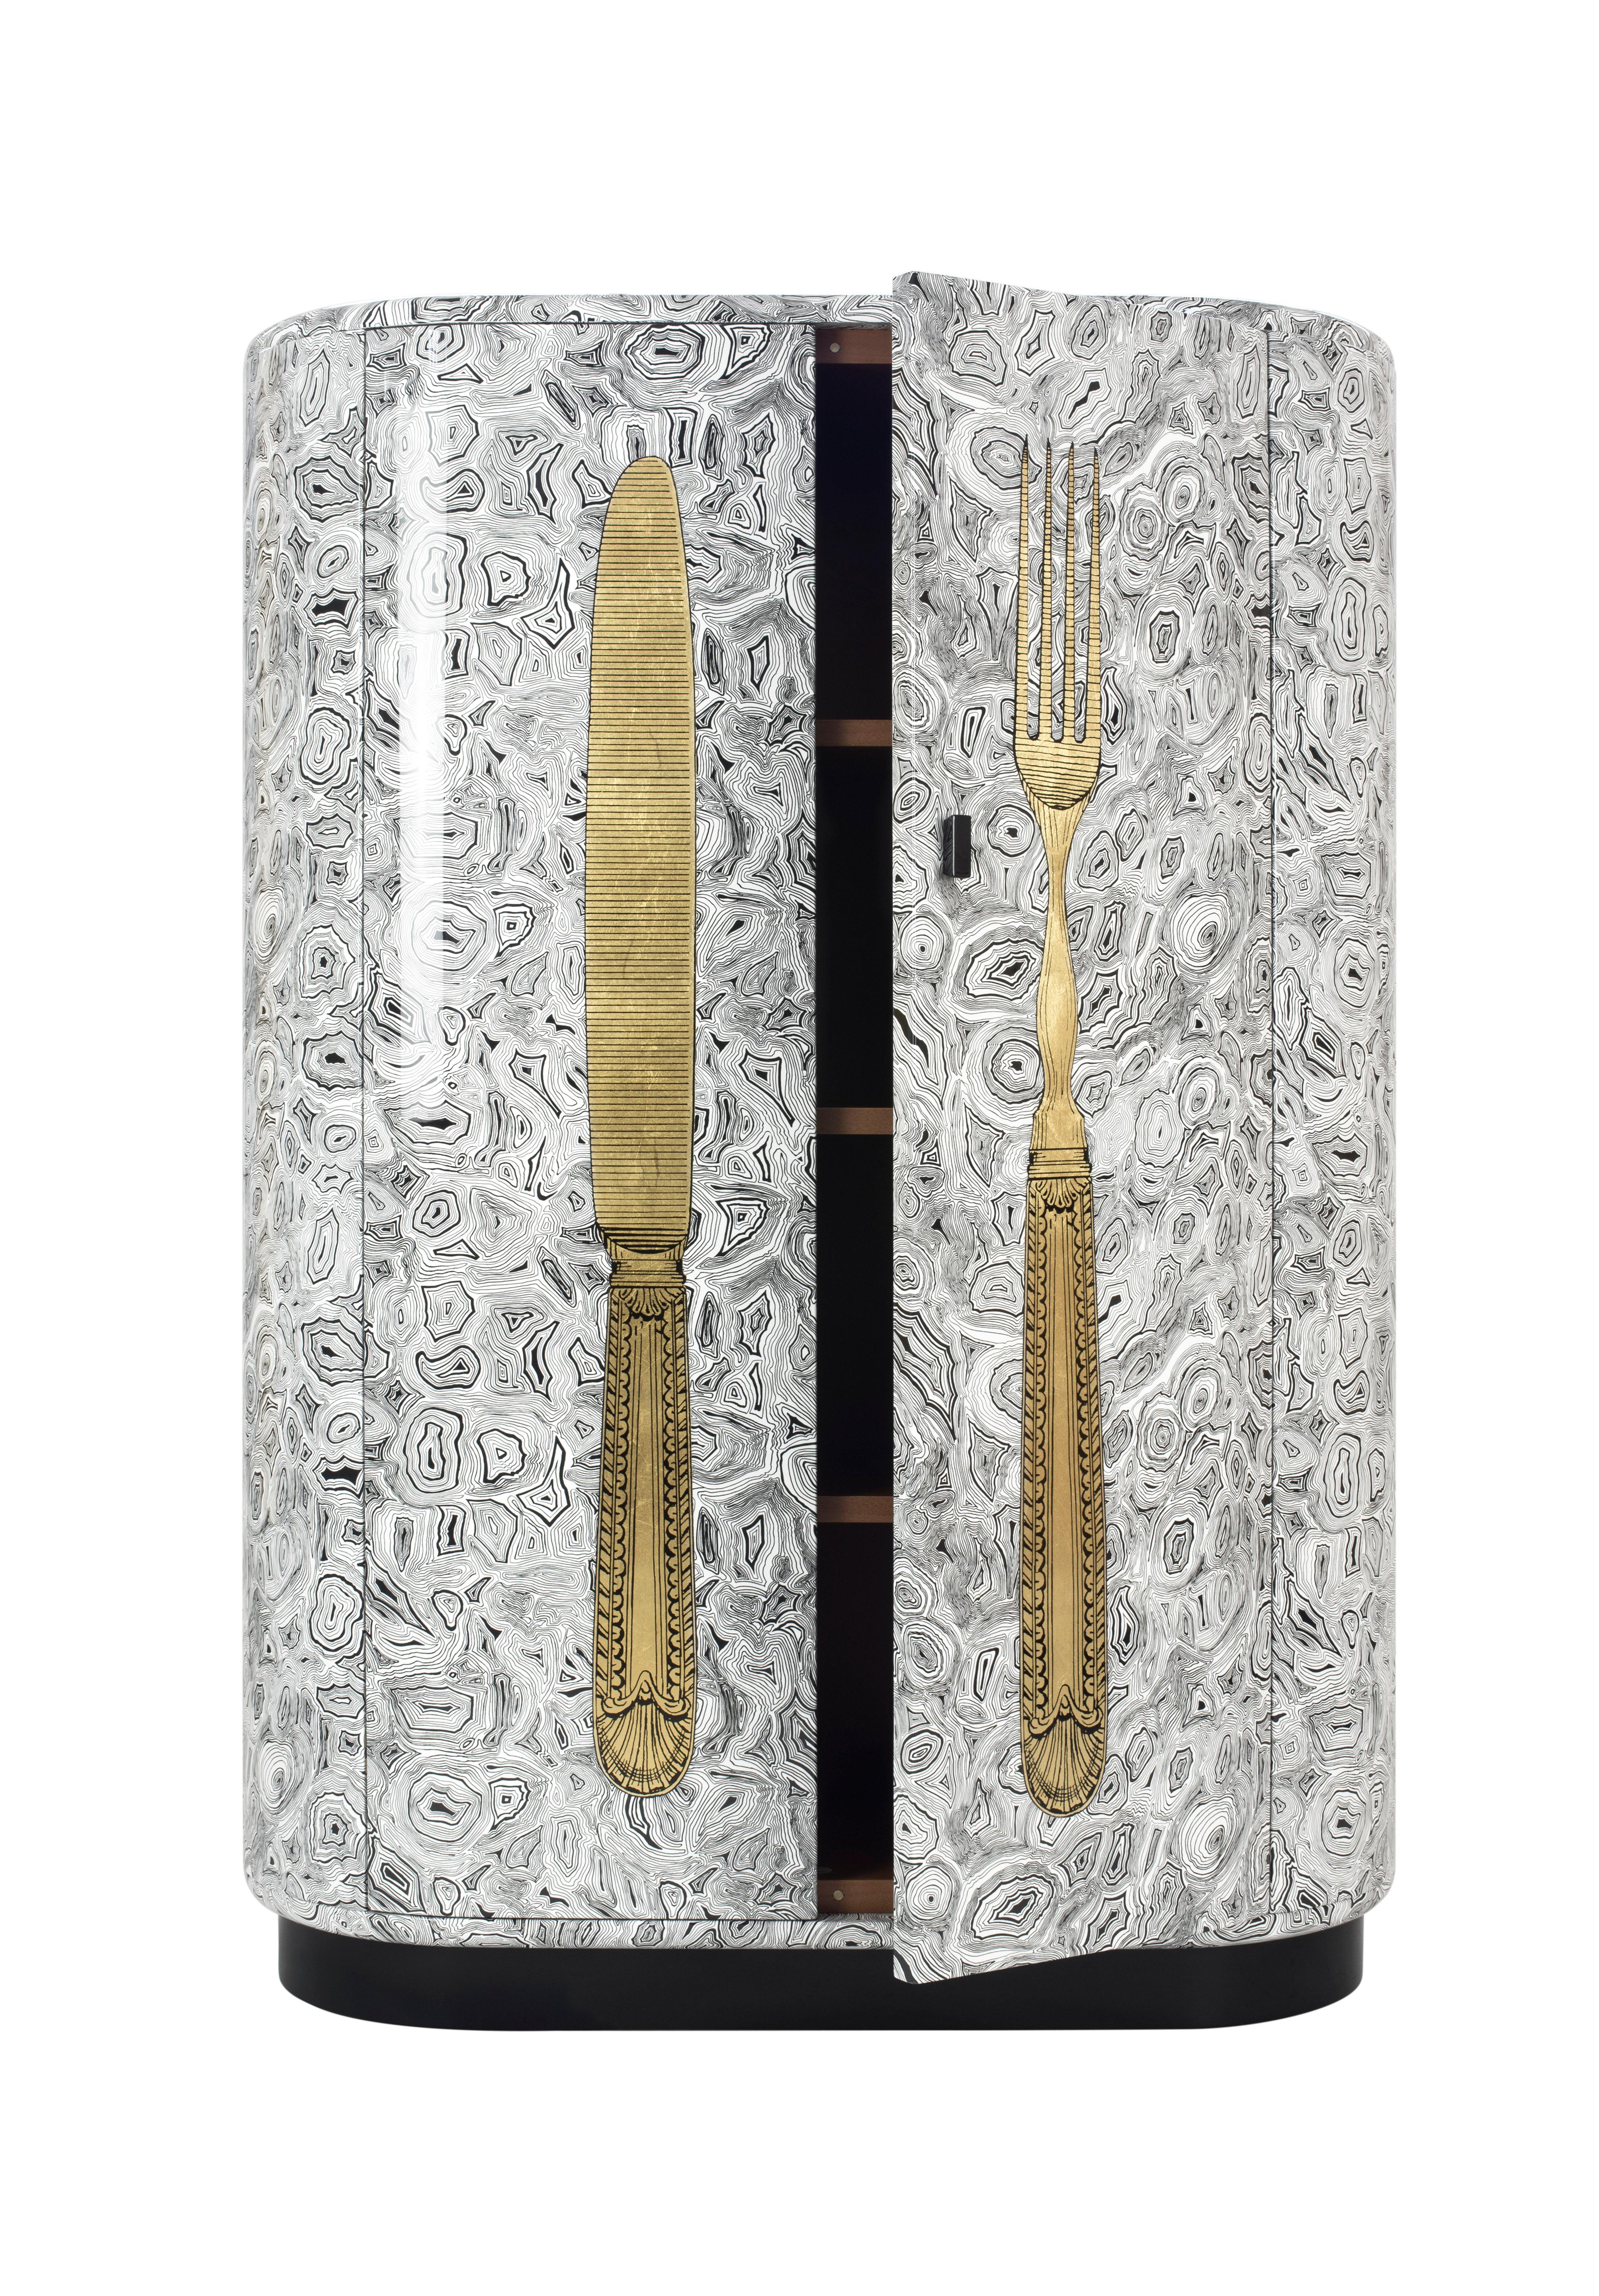 The curved cabinet shape was designed by Barnaba Fornasetti in 2003 and now it can be considered one of the most iconic pieces of furniture in the Italian atelier's collection. 

Like all Fornasetti pieces of furniture, it is handcrafted using